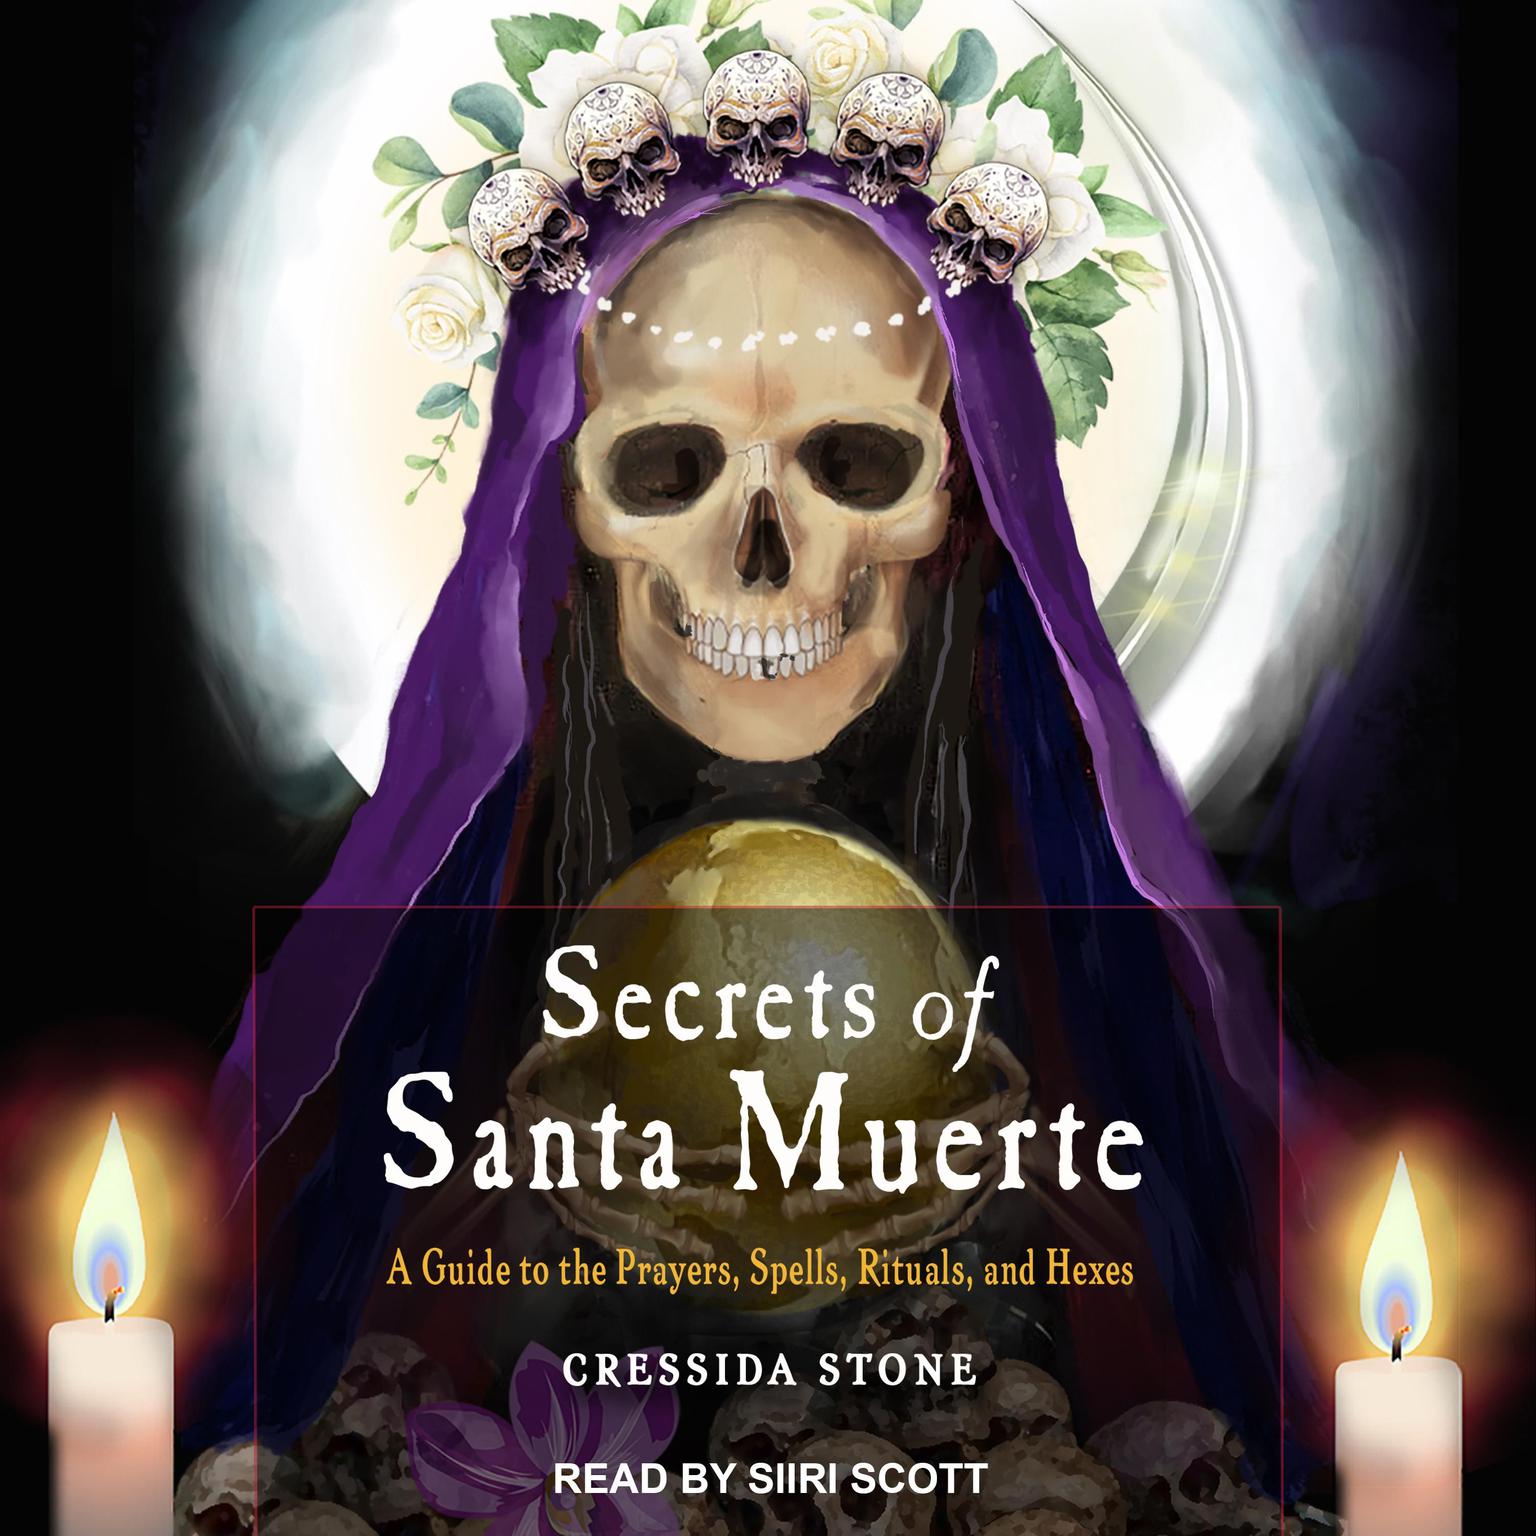 Secrets of Santa Muerte: A Guide to the Prayers, Spells, Rituals, and Hexes Audiobook, by Cressida Stone